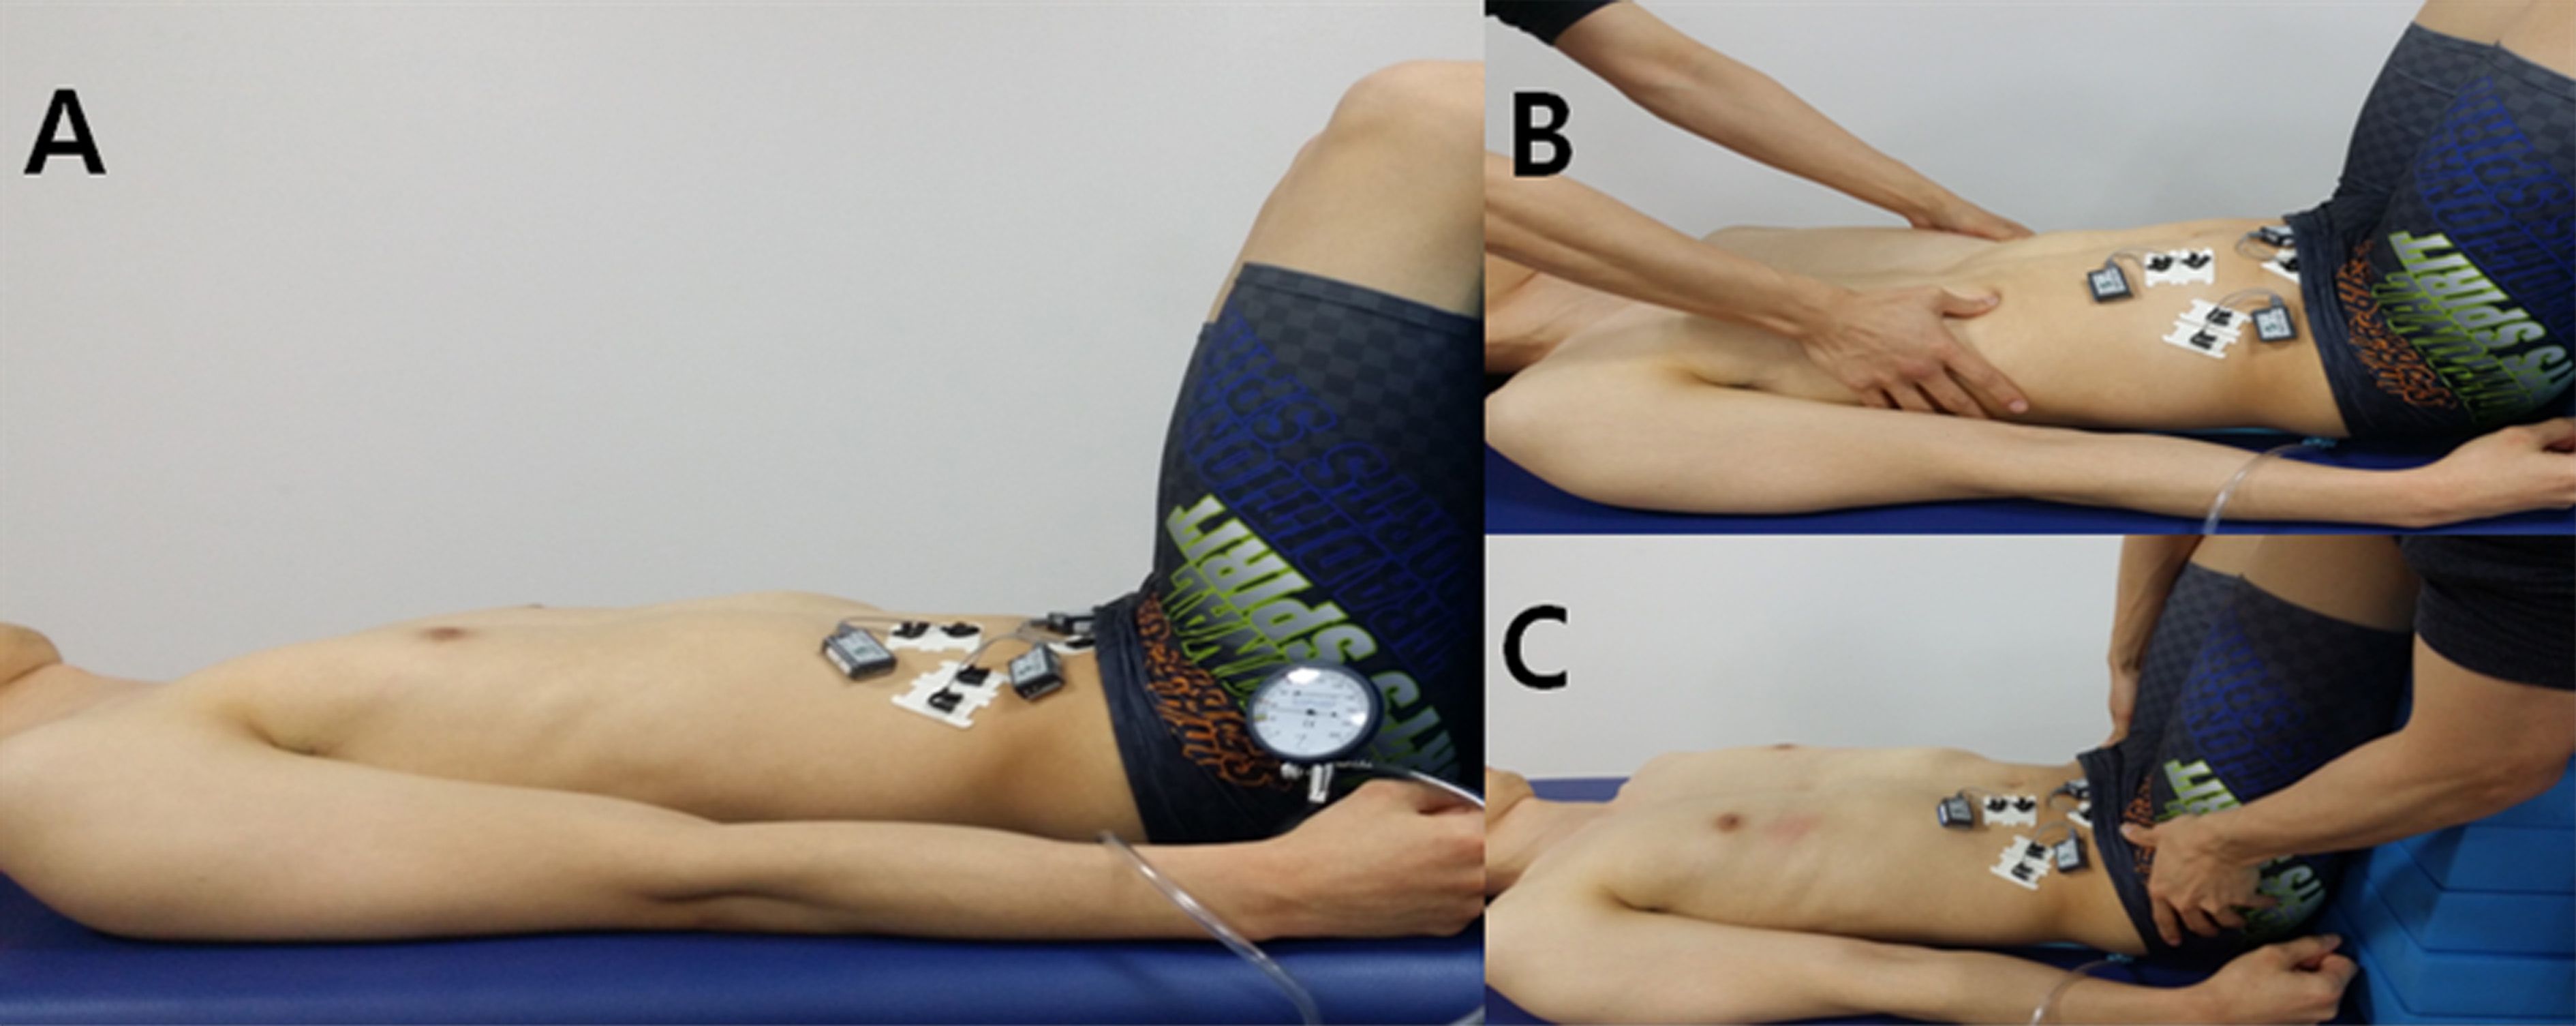 Exercises were implemented with participants lying supine with 90∘ hip and knee flexion, with the PBU under the lumbar spine. Three positions were used – A: resting position (crook lying), B: DNS, C: NDT.